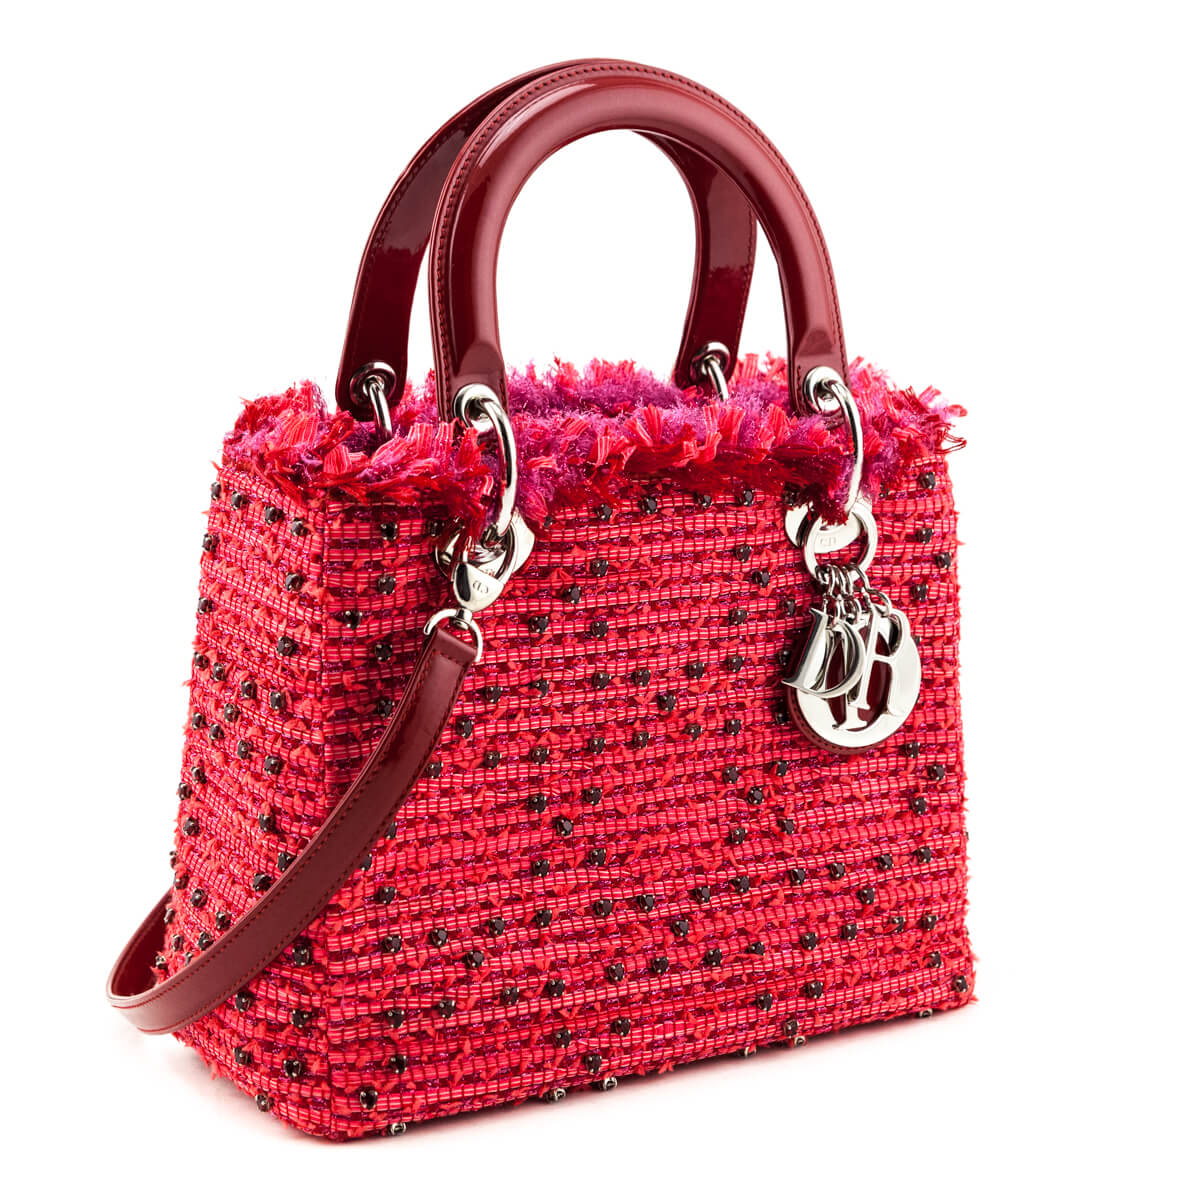 Dior Red Patent & Pink Tweed Embellished Medium Lady Dior Bag - Love that Bag etc - Preowned Authentic Designer Handbags & Preloved Fashions